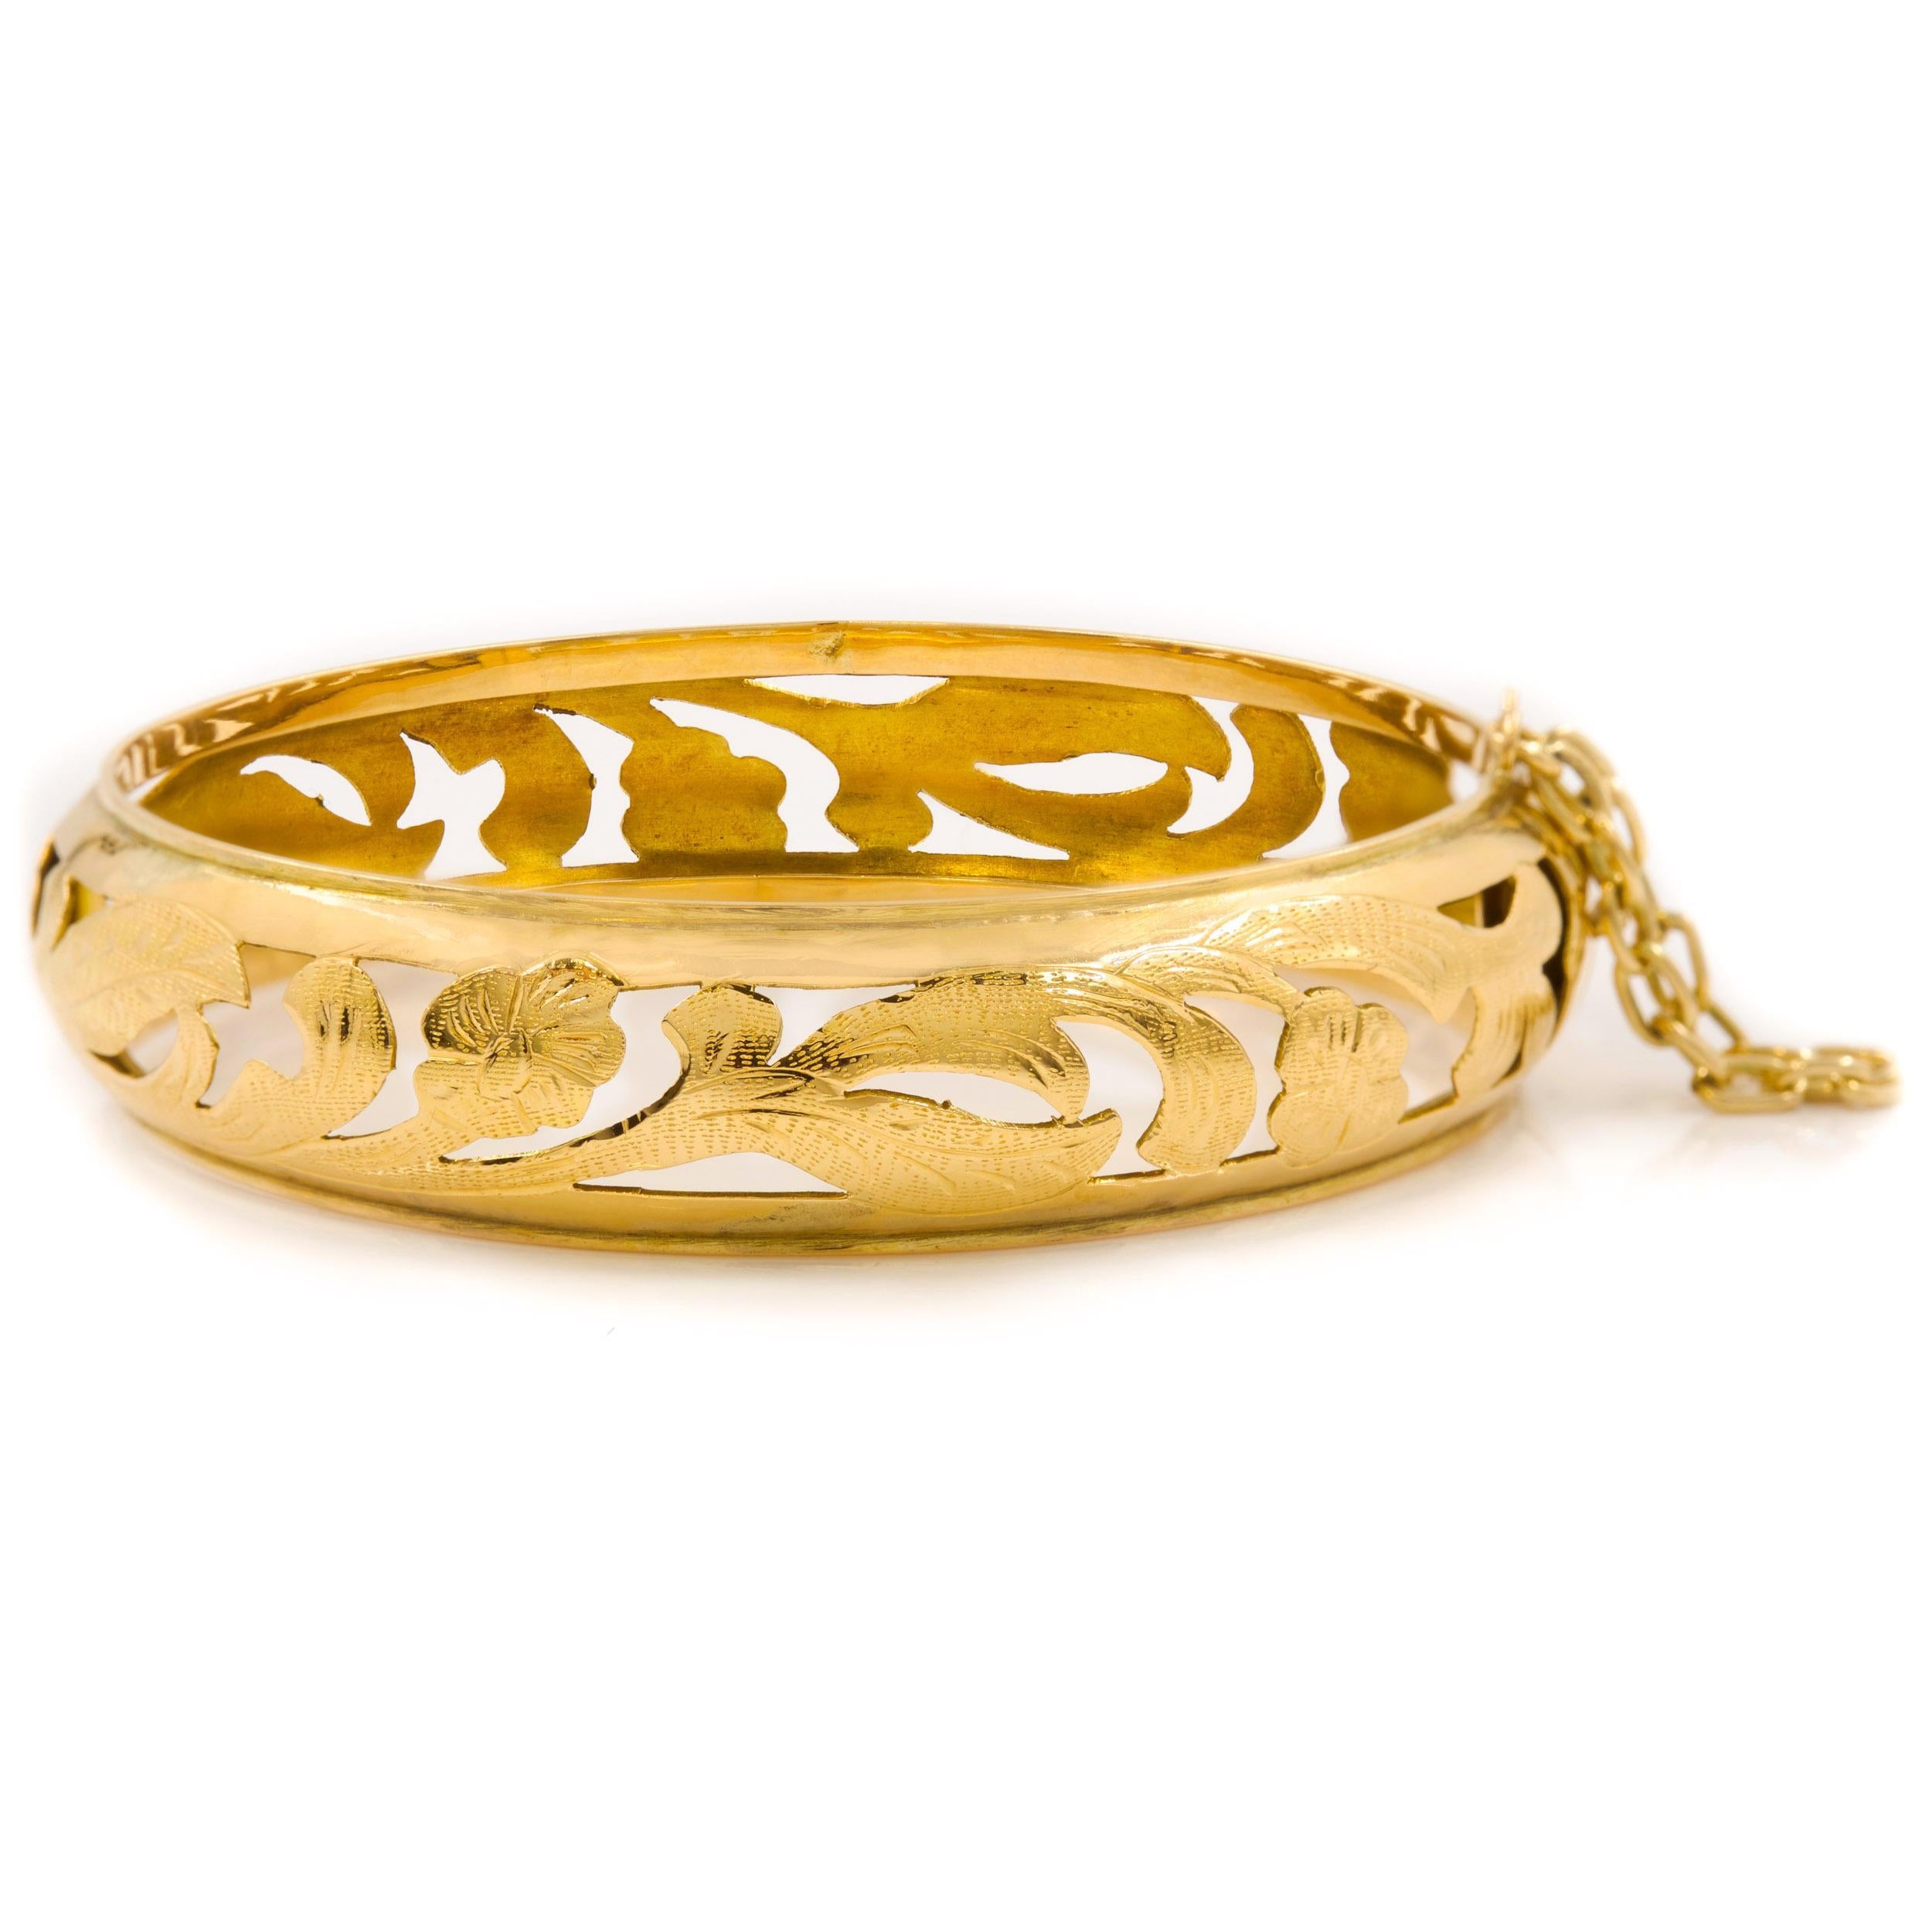 ANTIQUE ART NOUVEAU 14K GOLD BANGLE BRACELET
With a pierced and engraved floral design; circa early 20th century
Item # C104205 

A fine quality antique Art Nouveau bangle bracelet crafted entirely of 14k gold that has been beautifully pierced to